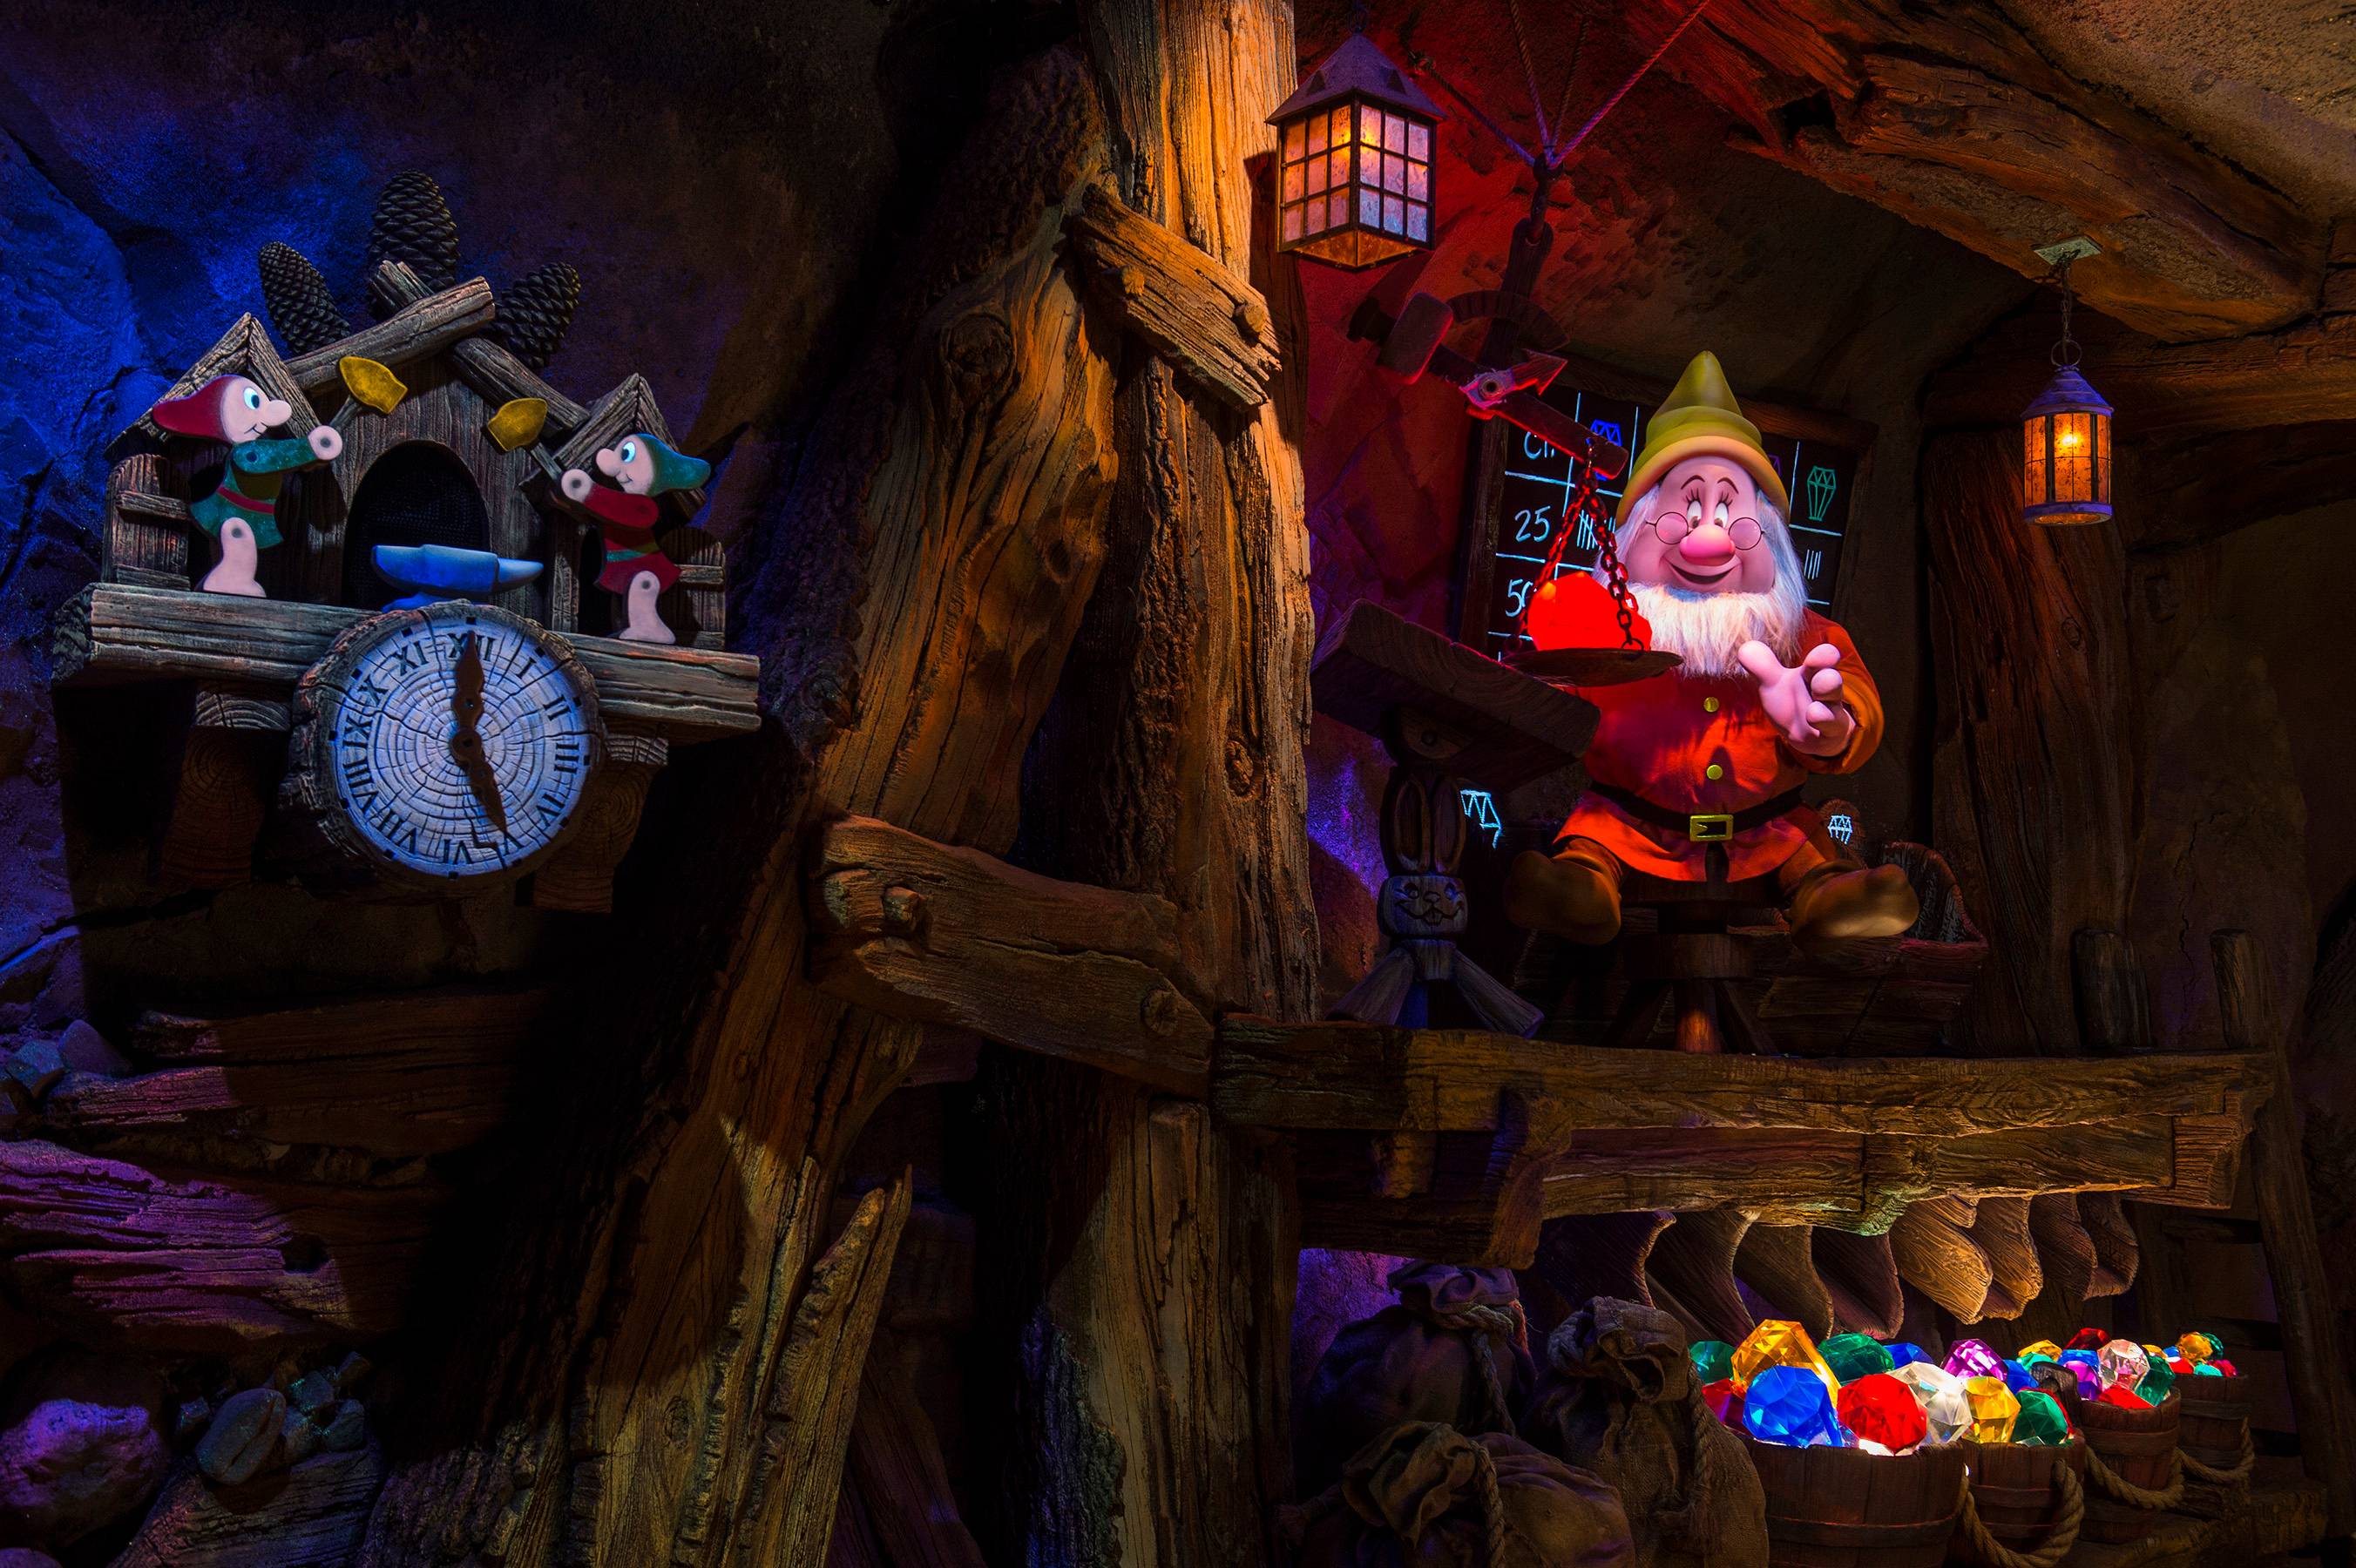 PHOTOS - Close-up look at the Seven Dwarfs Mine Train animatronics and show scenes